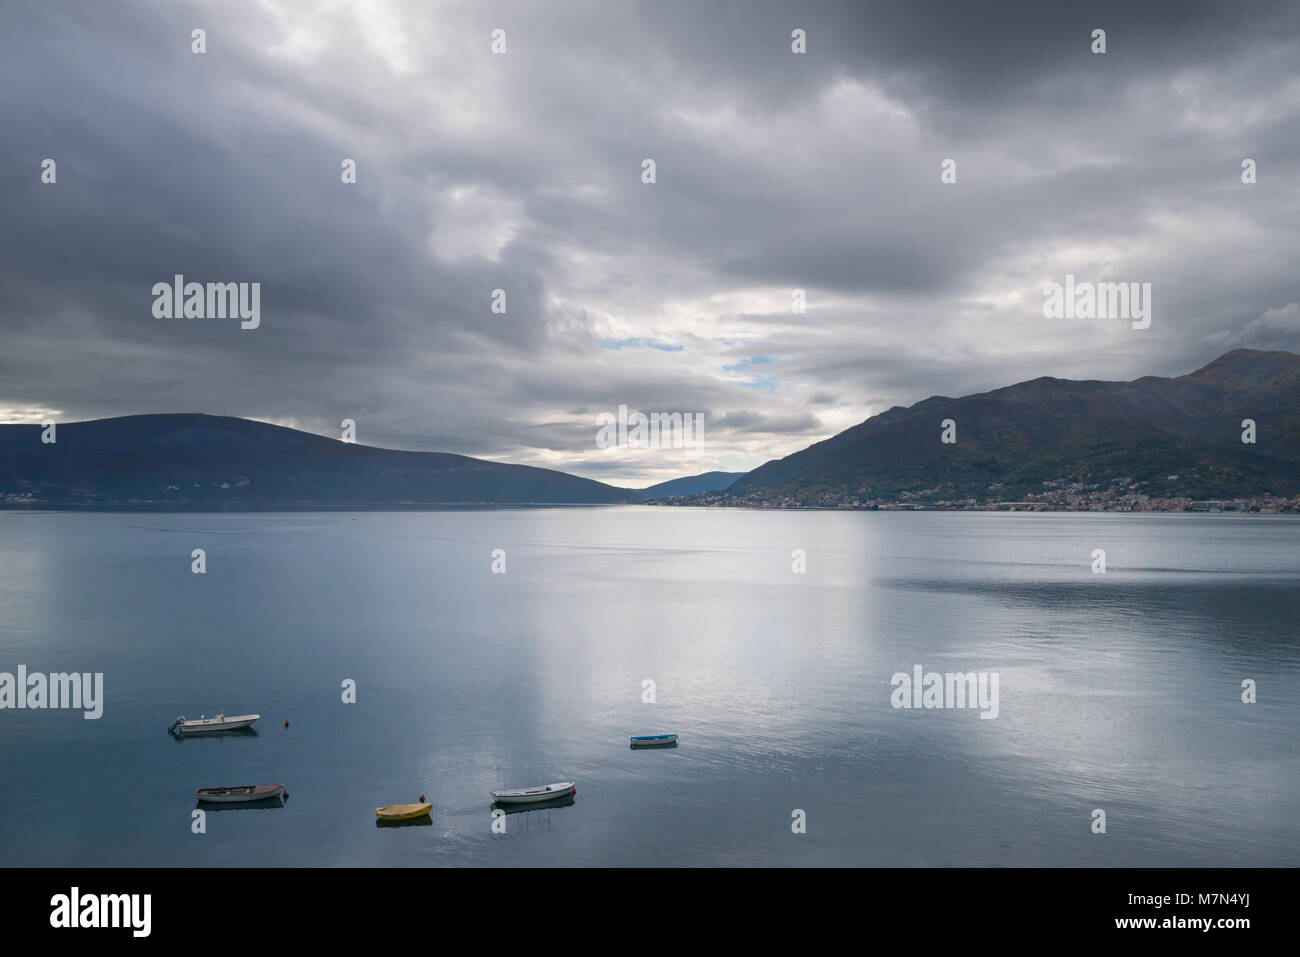 Landscape with small boats on the calm water. Dramatic clouds and mountains on background in the bay in Montenegro. Stock Photo